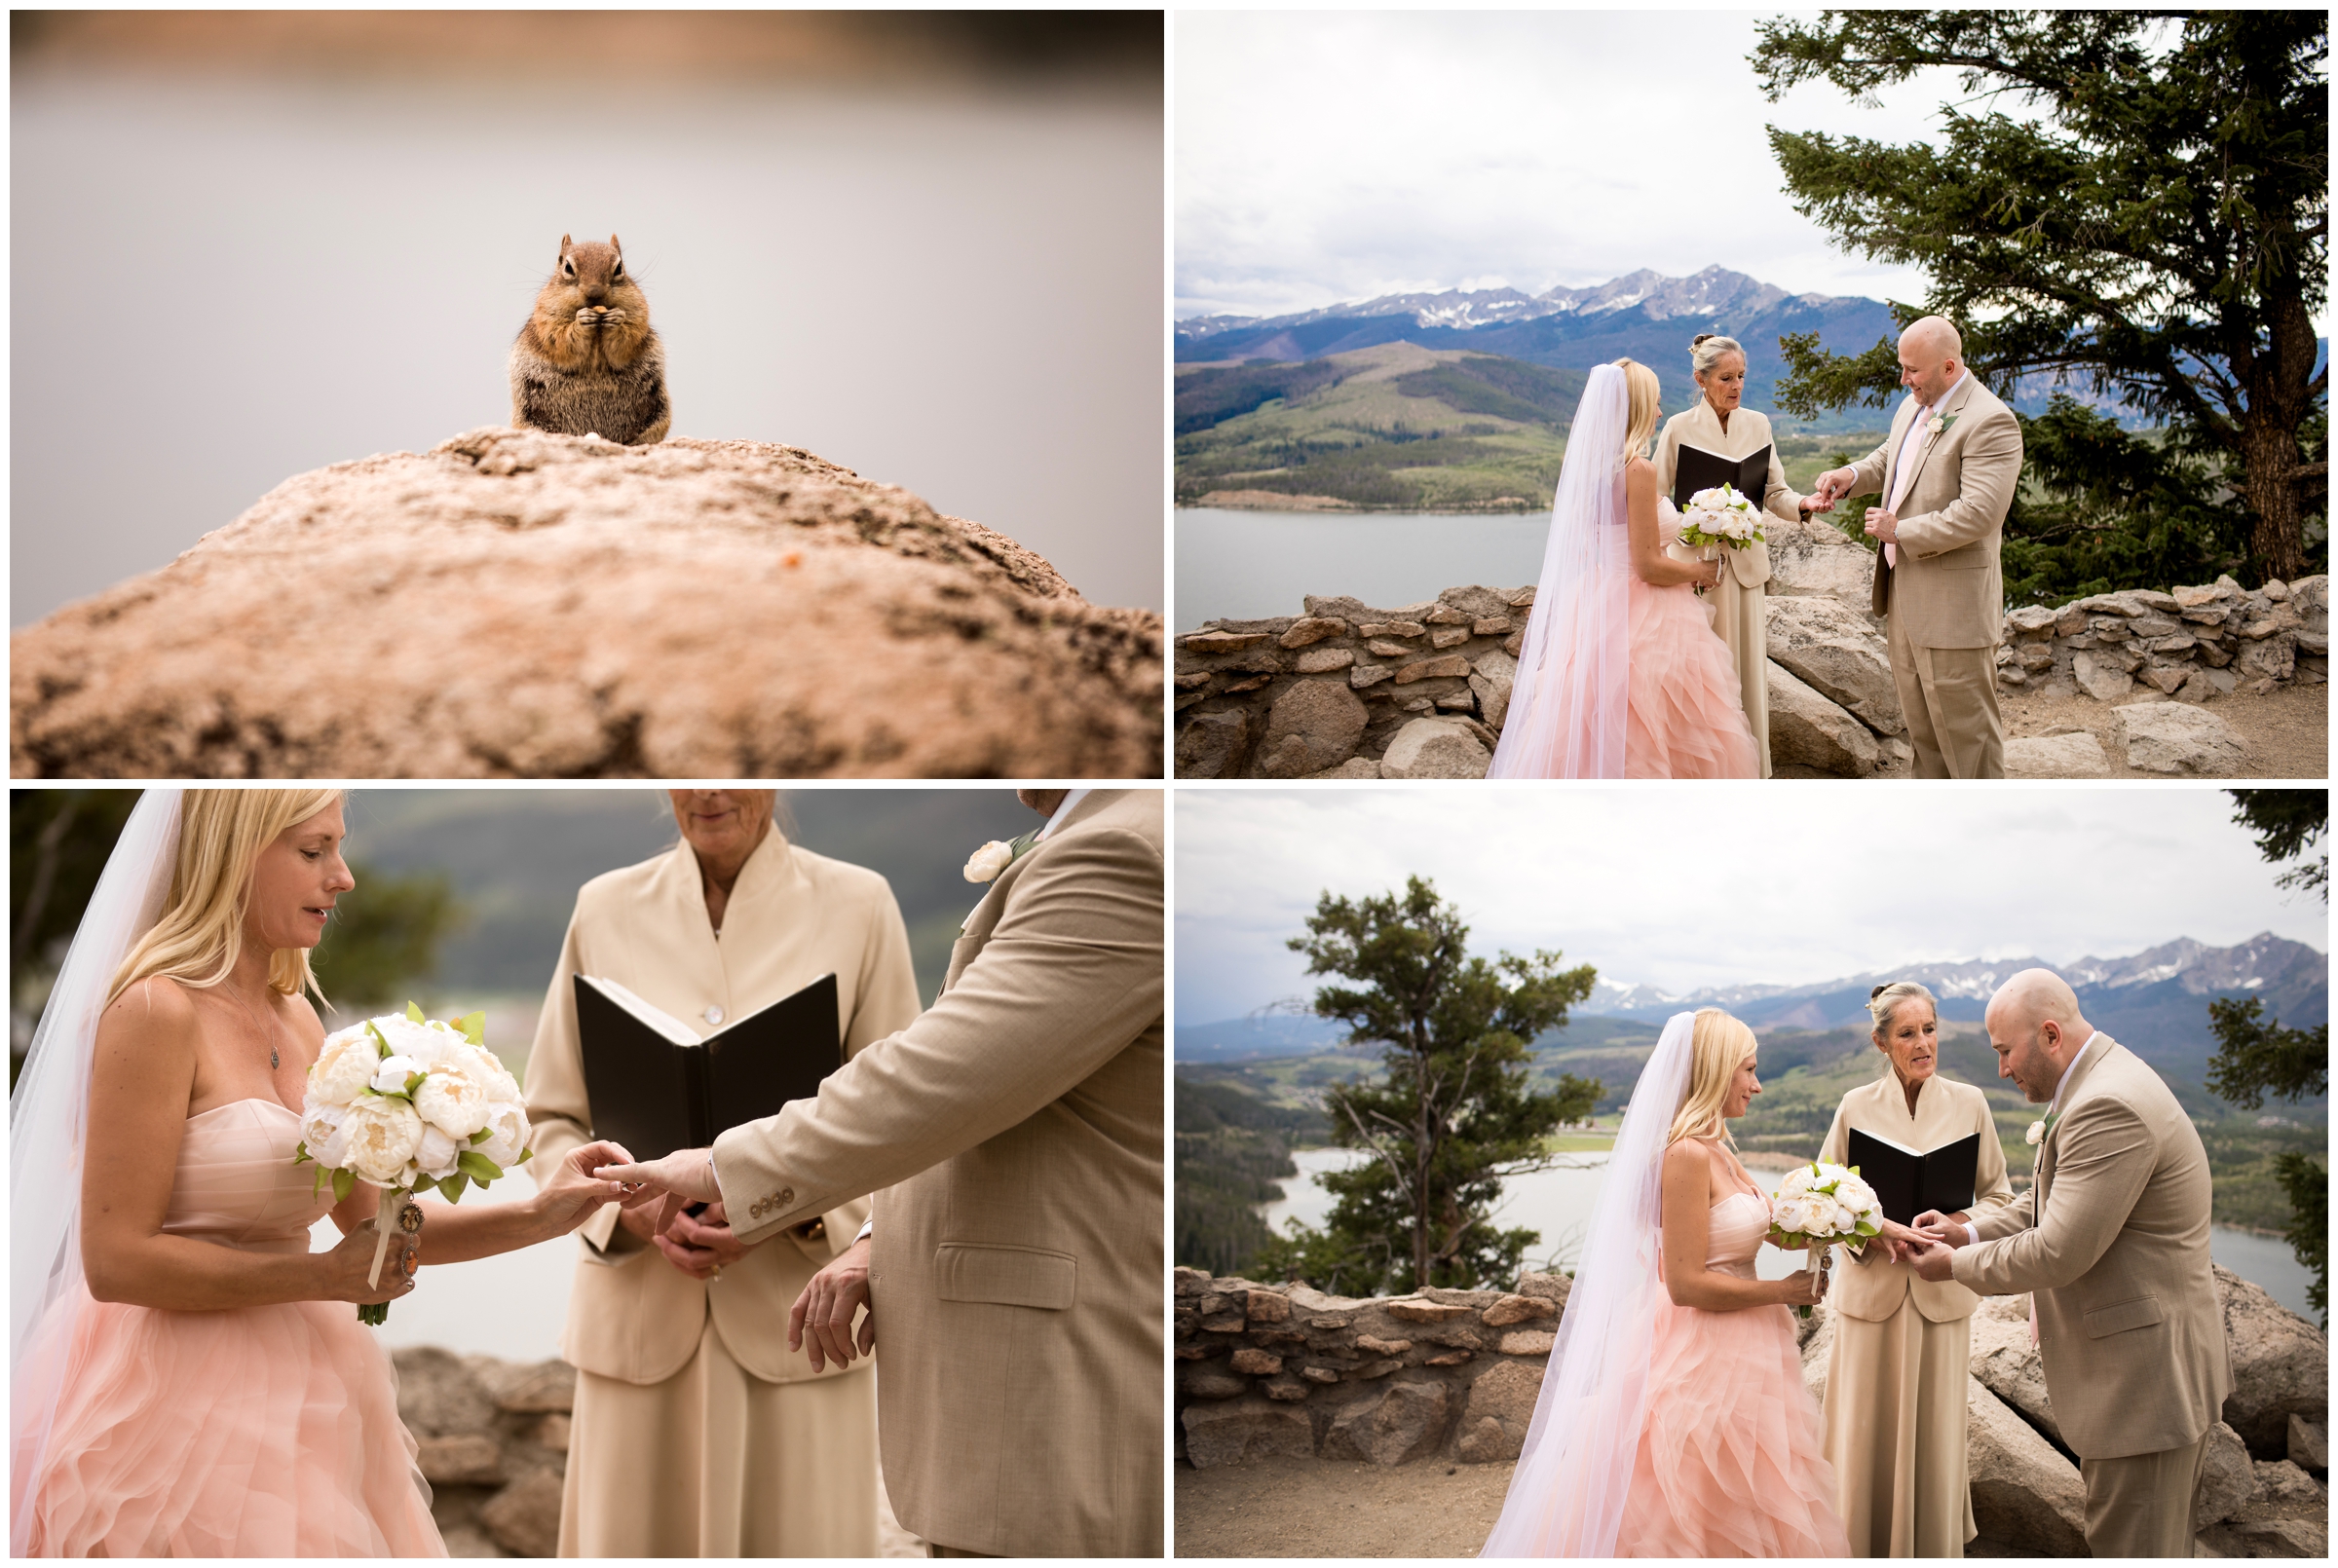 Intimate elopement wedding ceremony at Sapphire Point Overlook